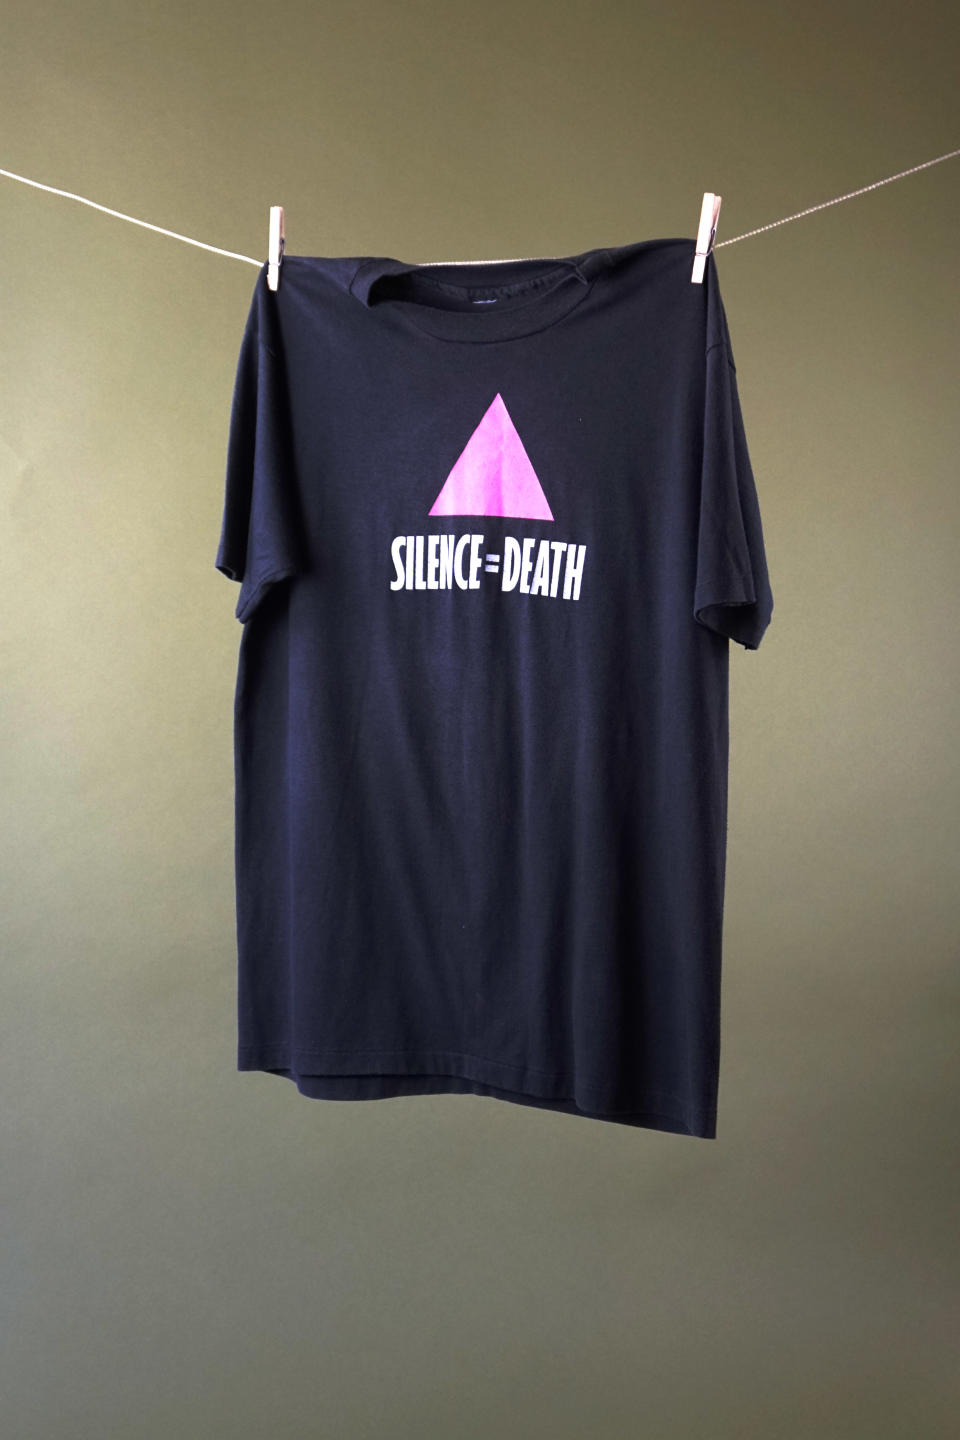 A "Silence = Death" campaign t-shirt on display.